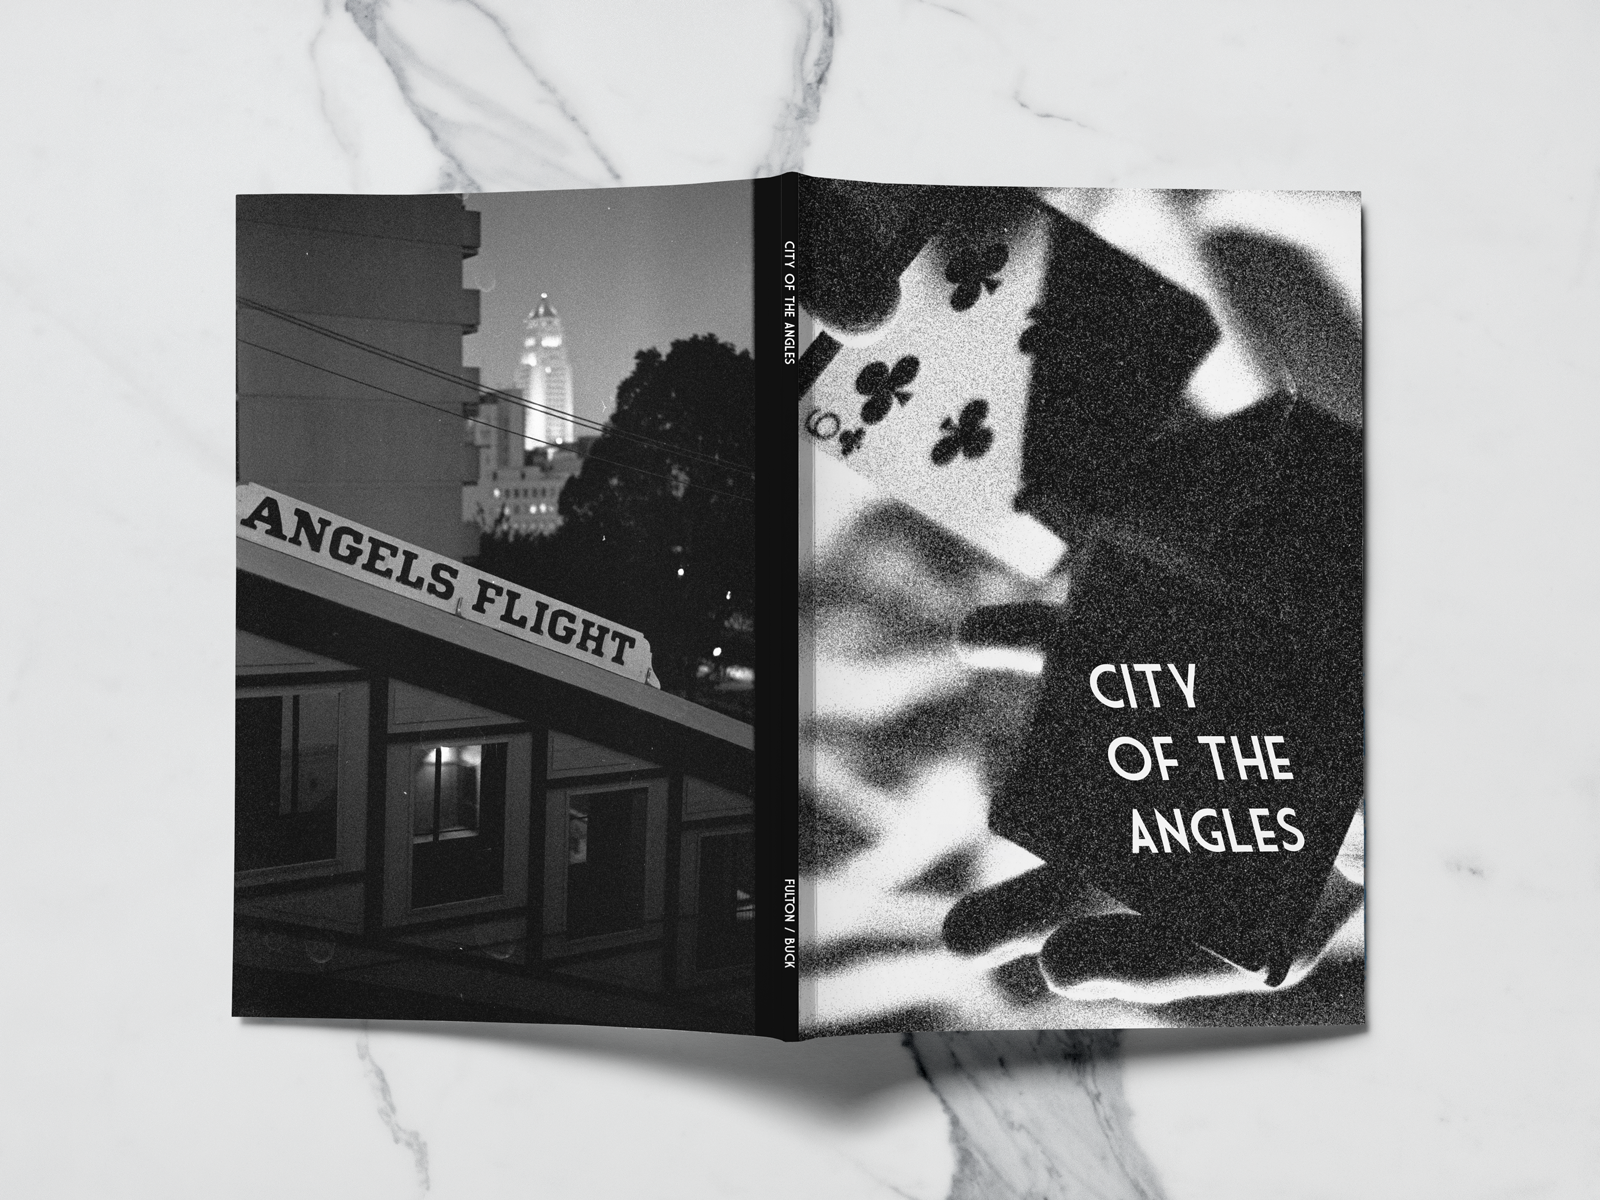 City of the Angles